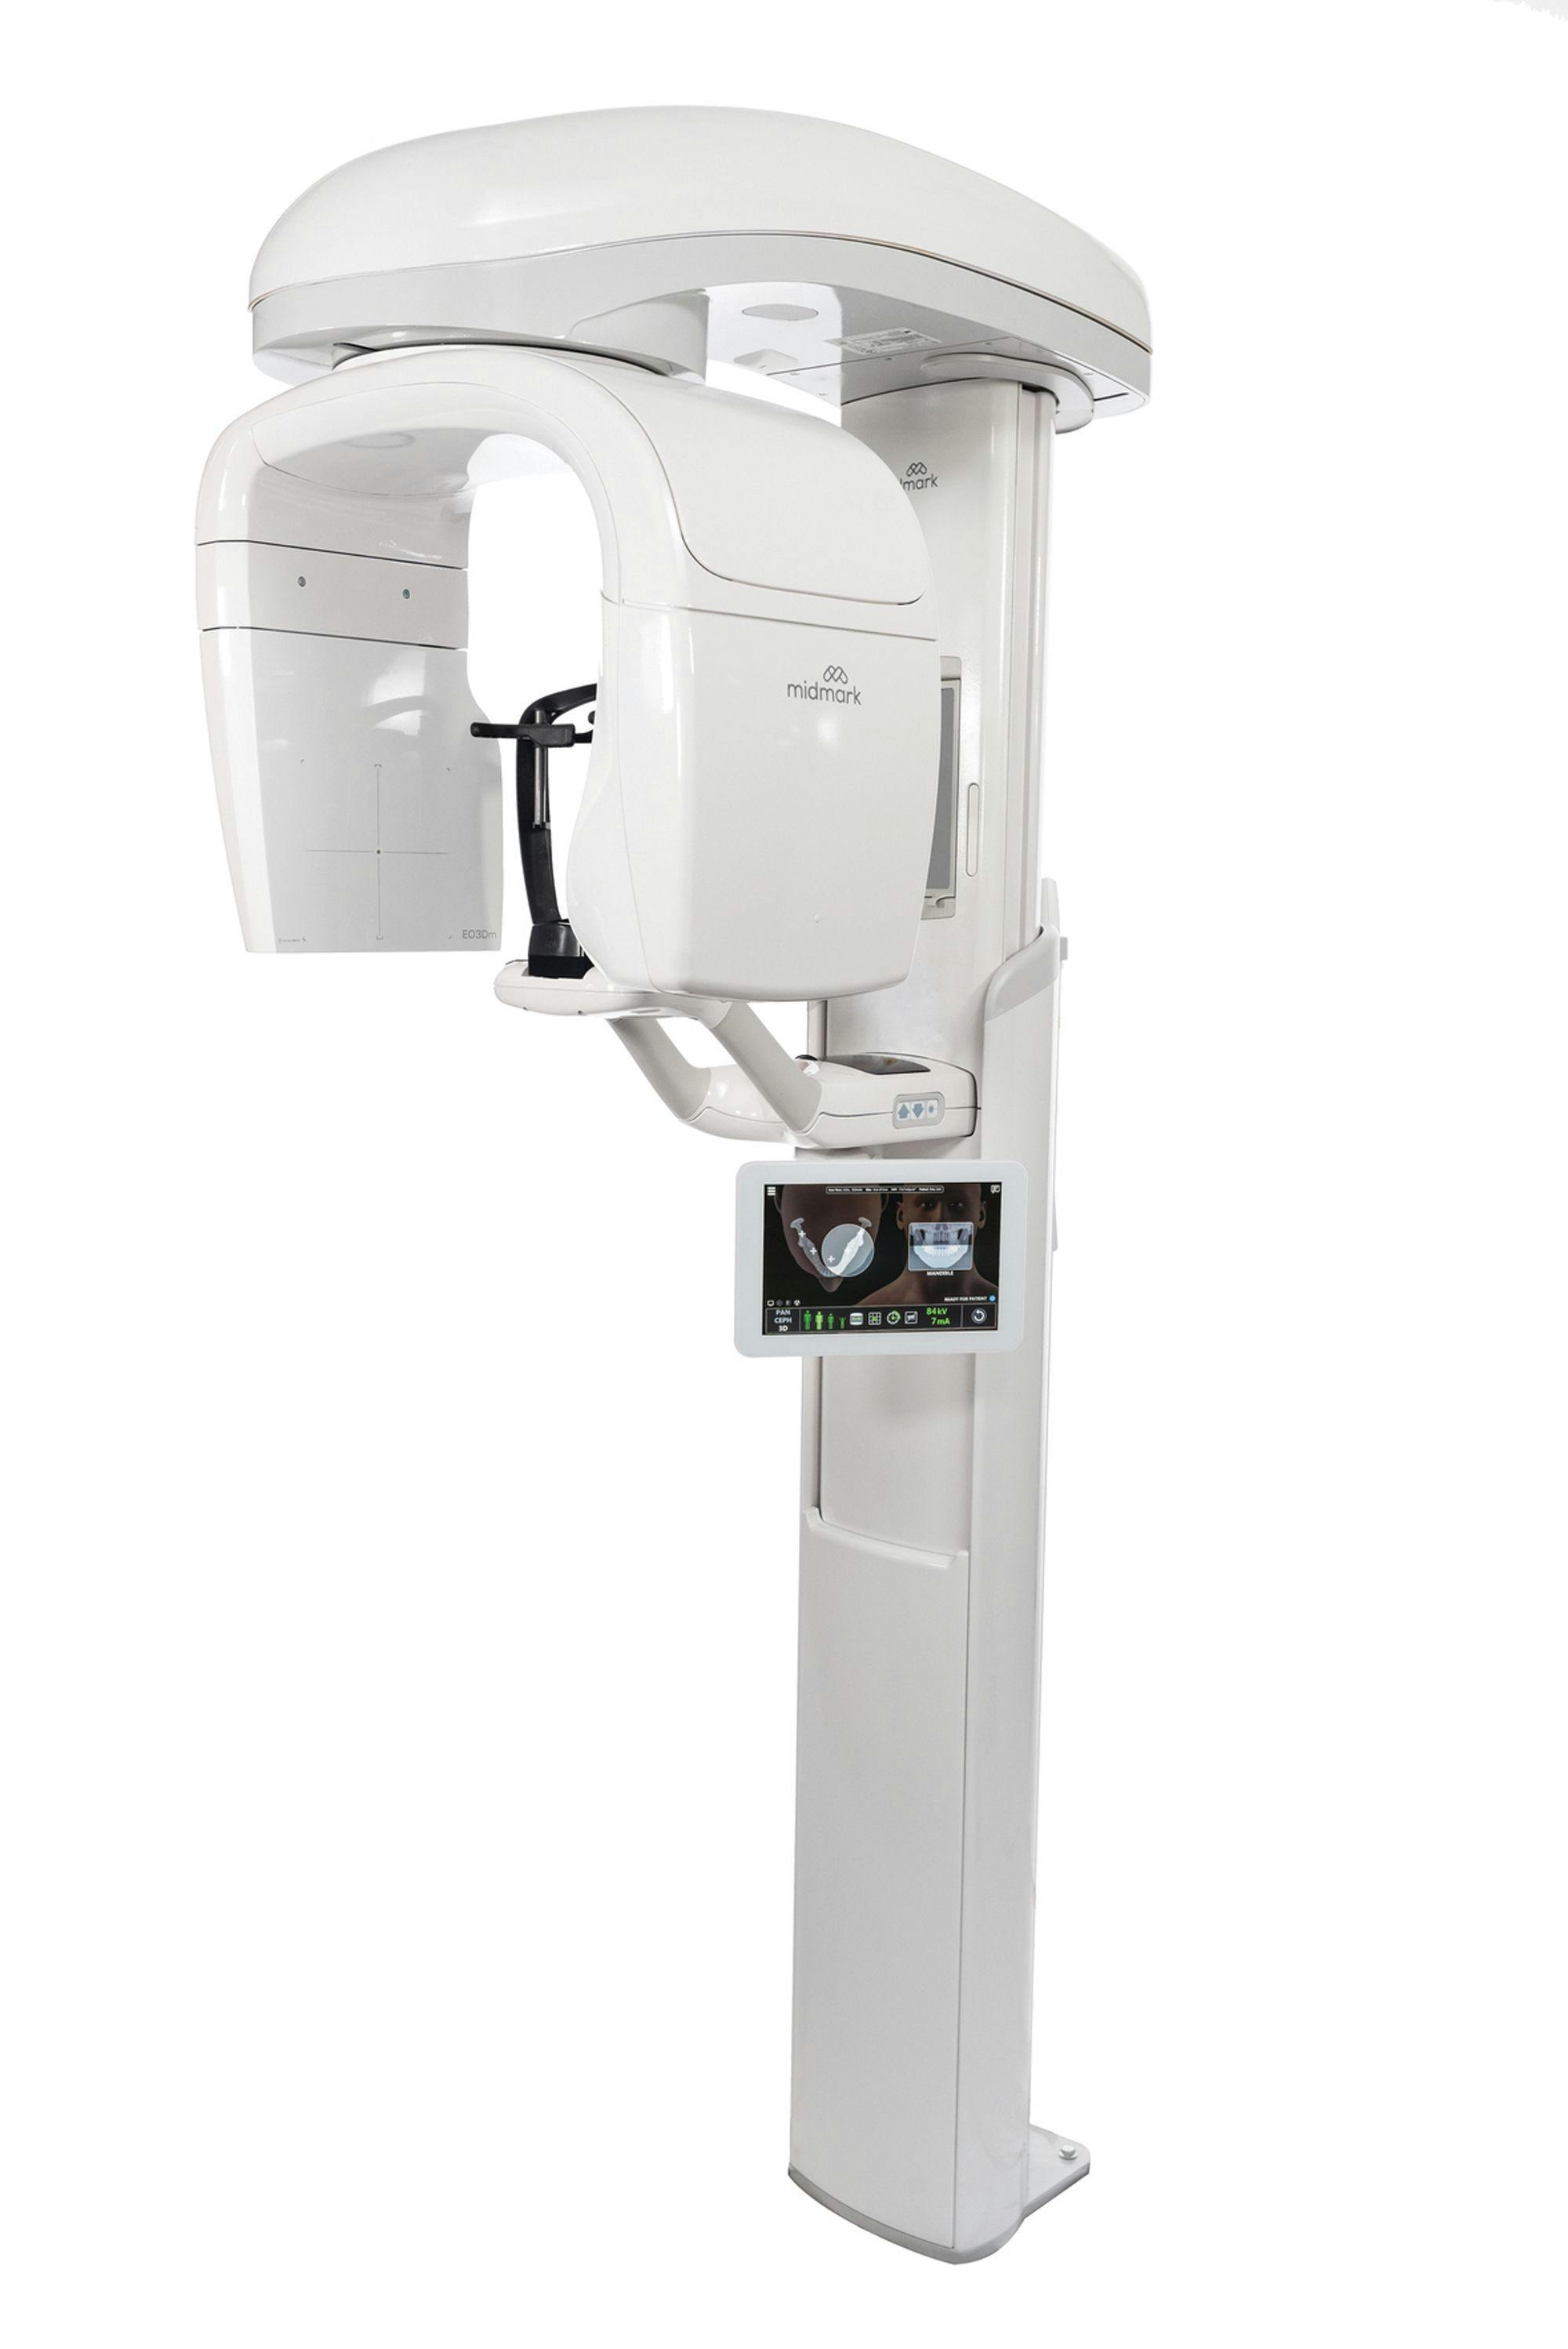 5Ws* Midmark Extraoral Imaging System